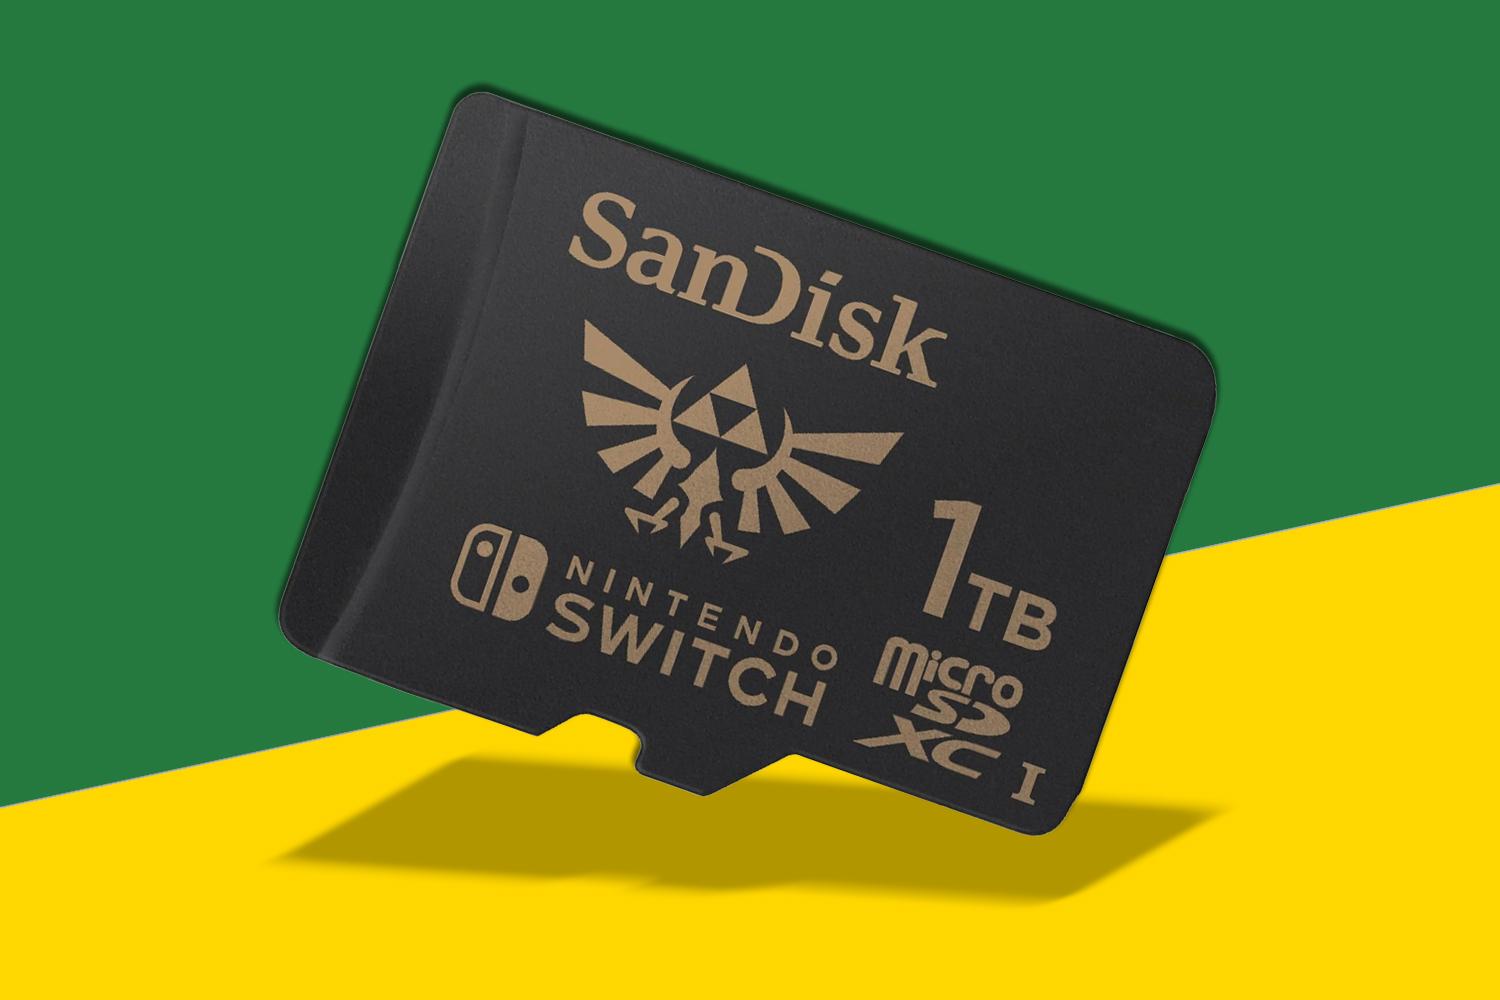 Nintendo Switch fans rejoice: upgrade your storage with SanDisk's huge 1TB  microSD card